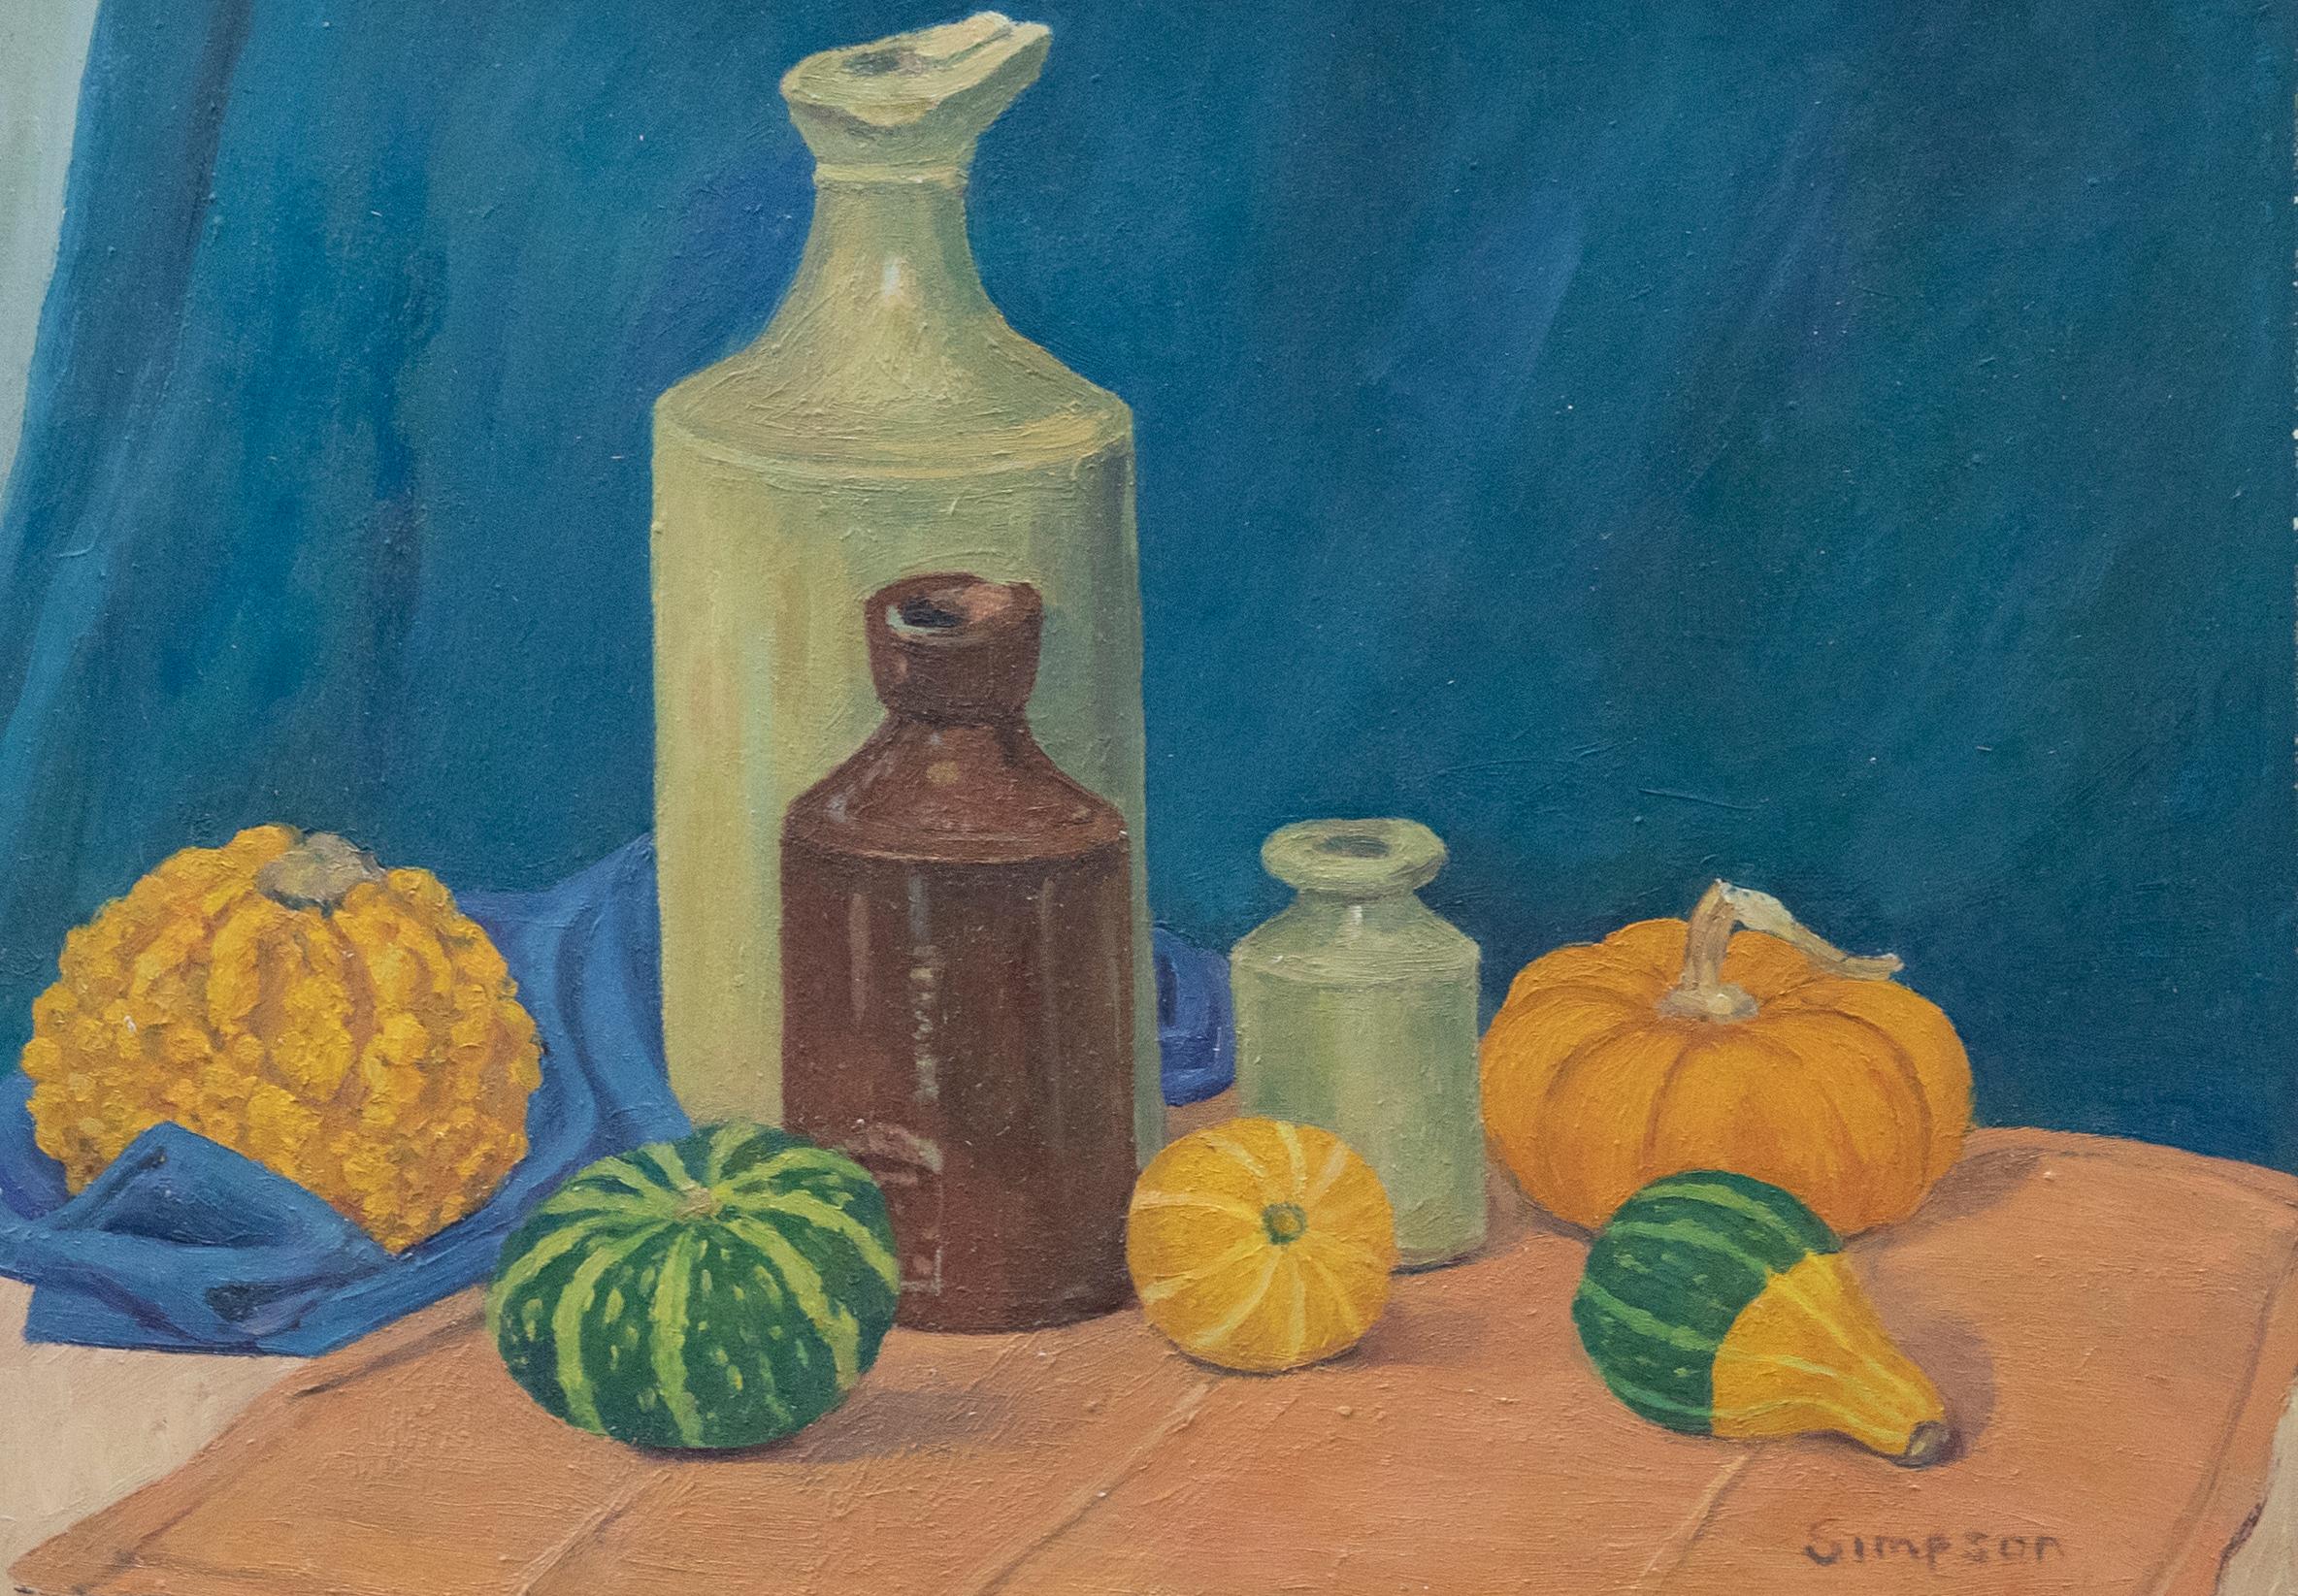 J. Simpson - Contemporary Oil, Ceramics and Gourds - Painting by Unknown